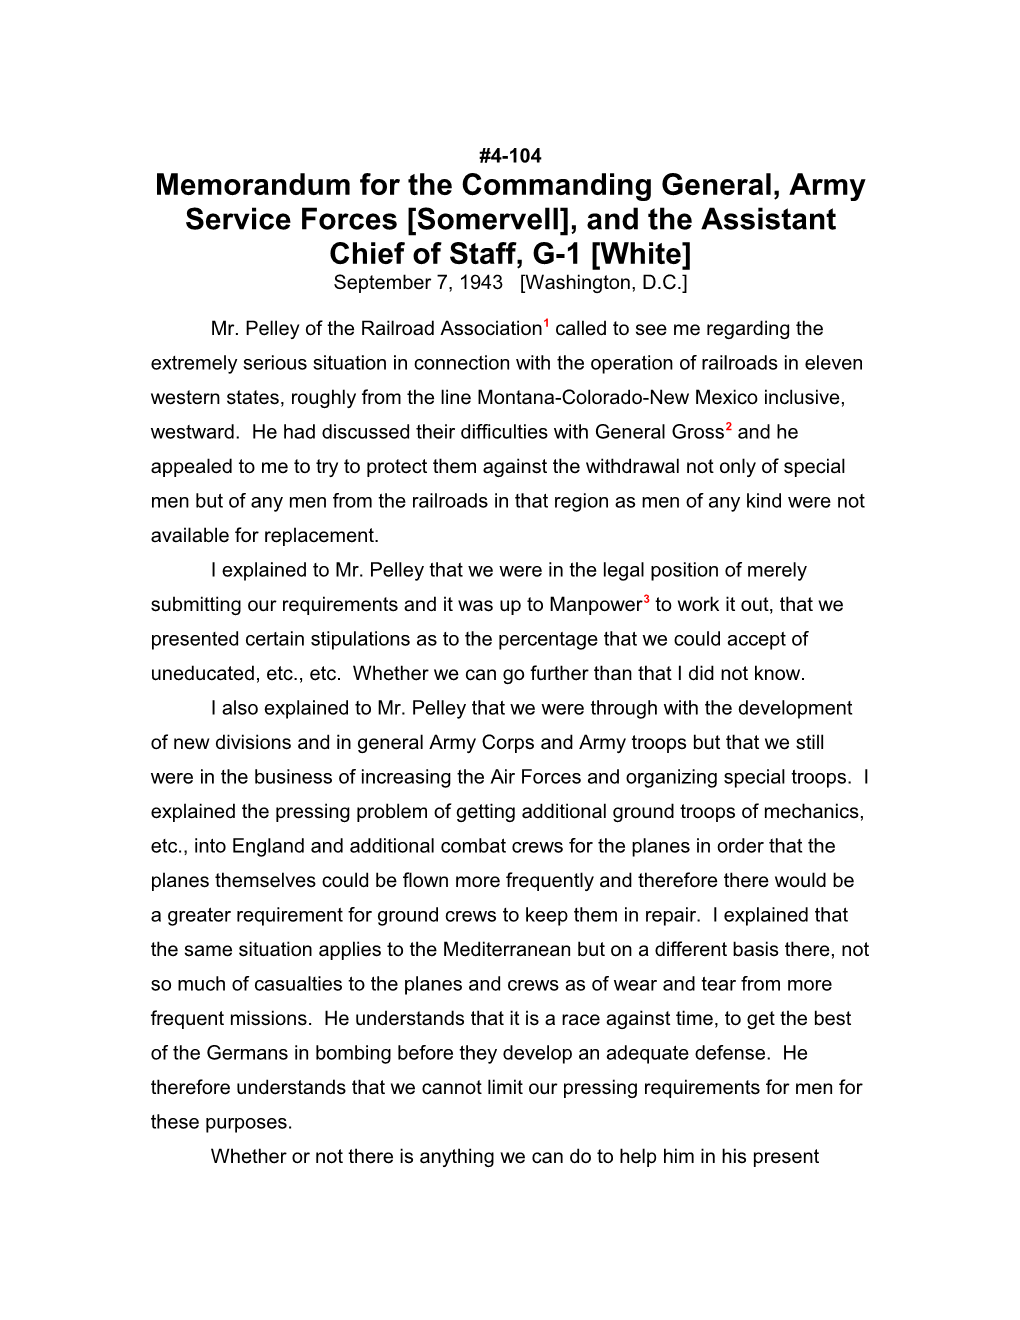 Memorandum for the Commanding General, Army Service Forces Somervell , and the Assistant